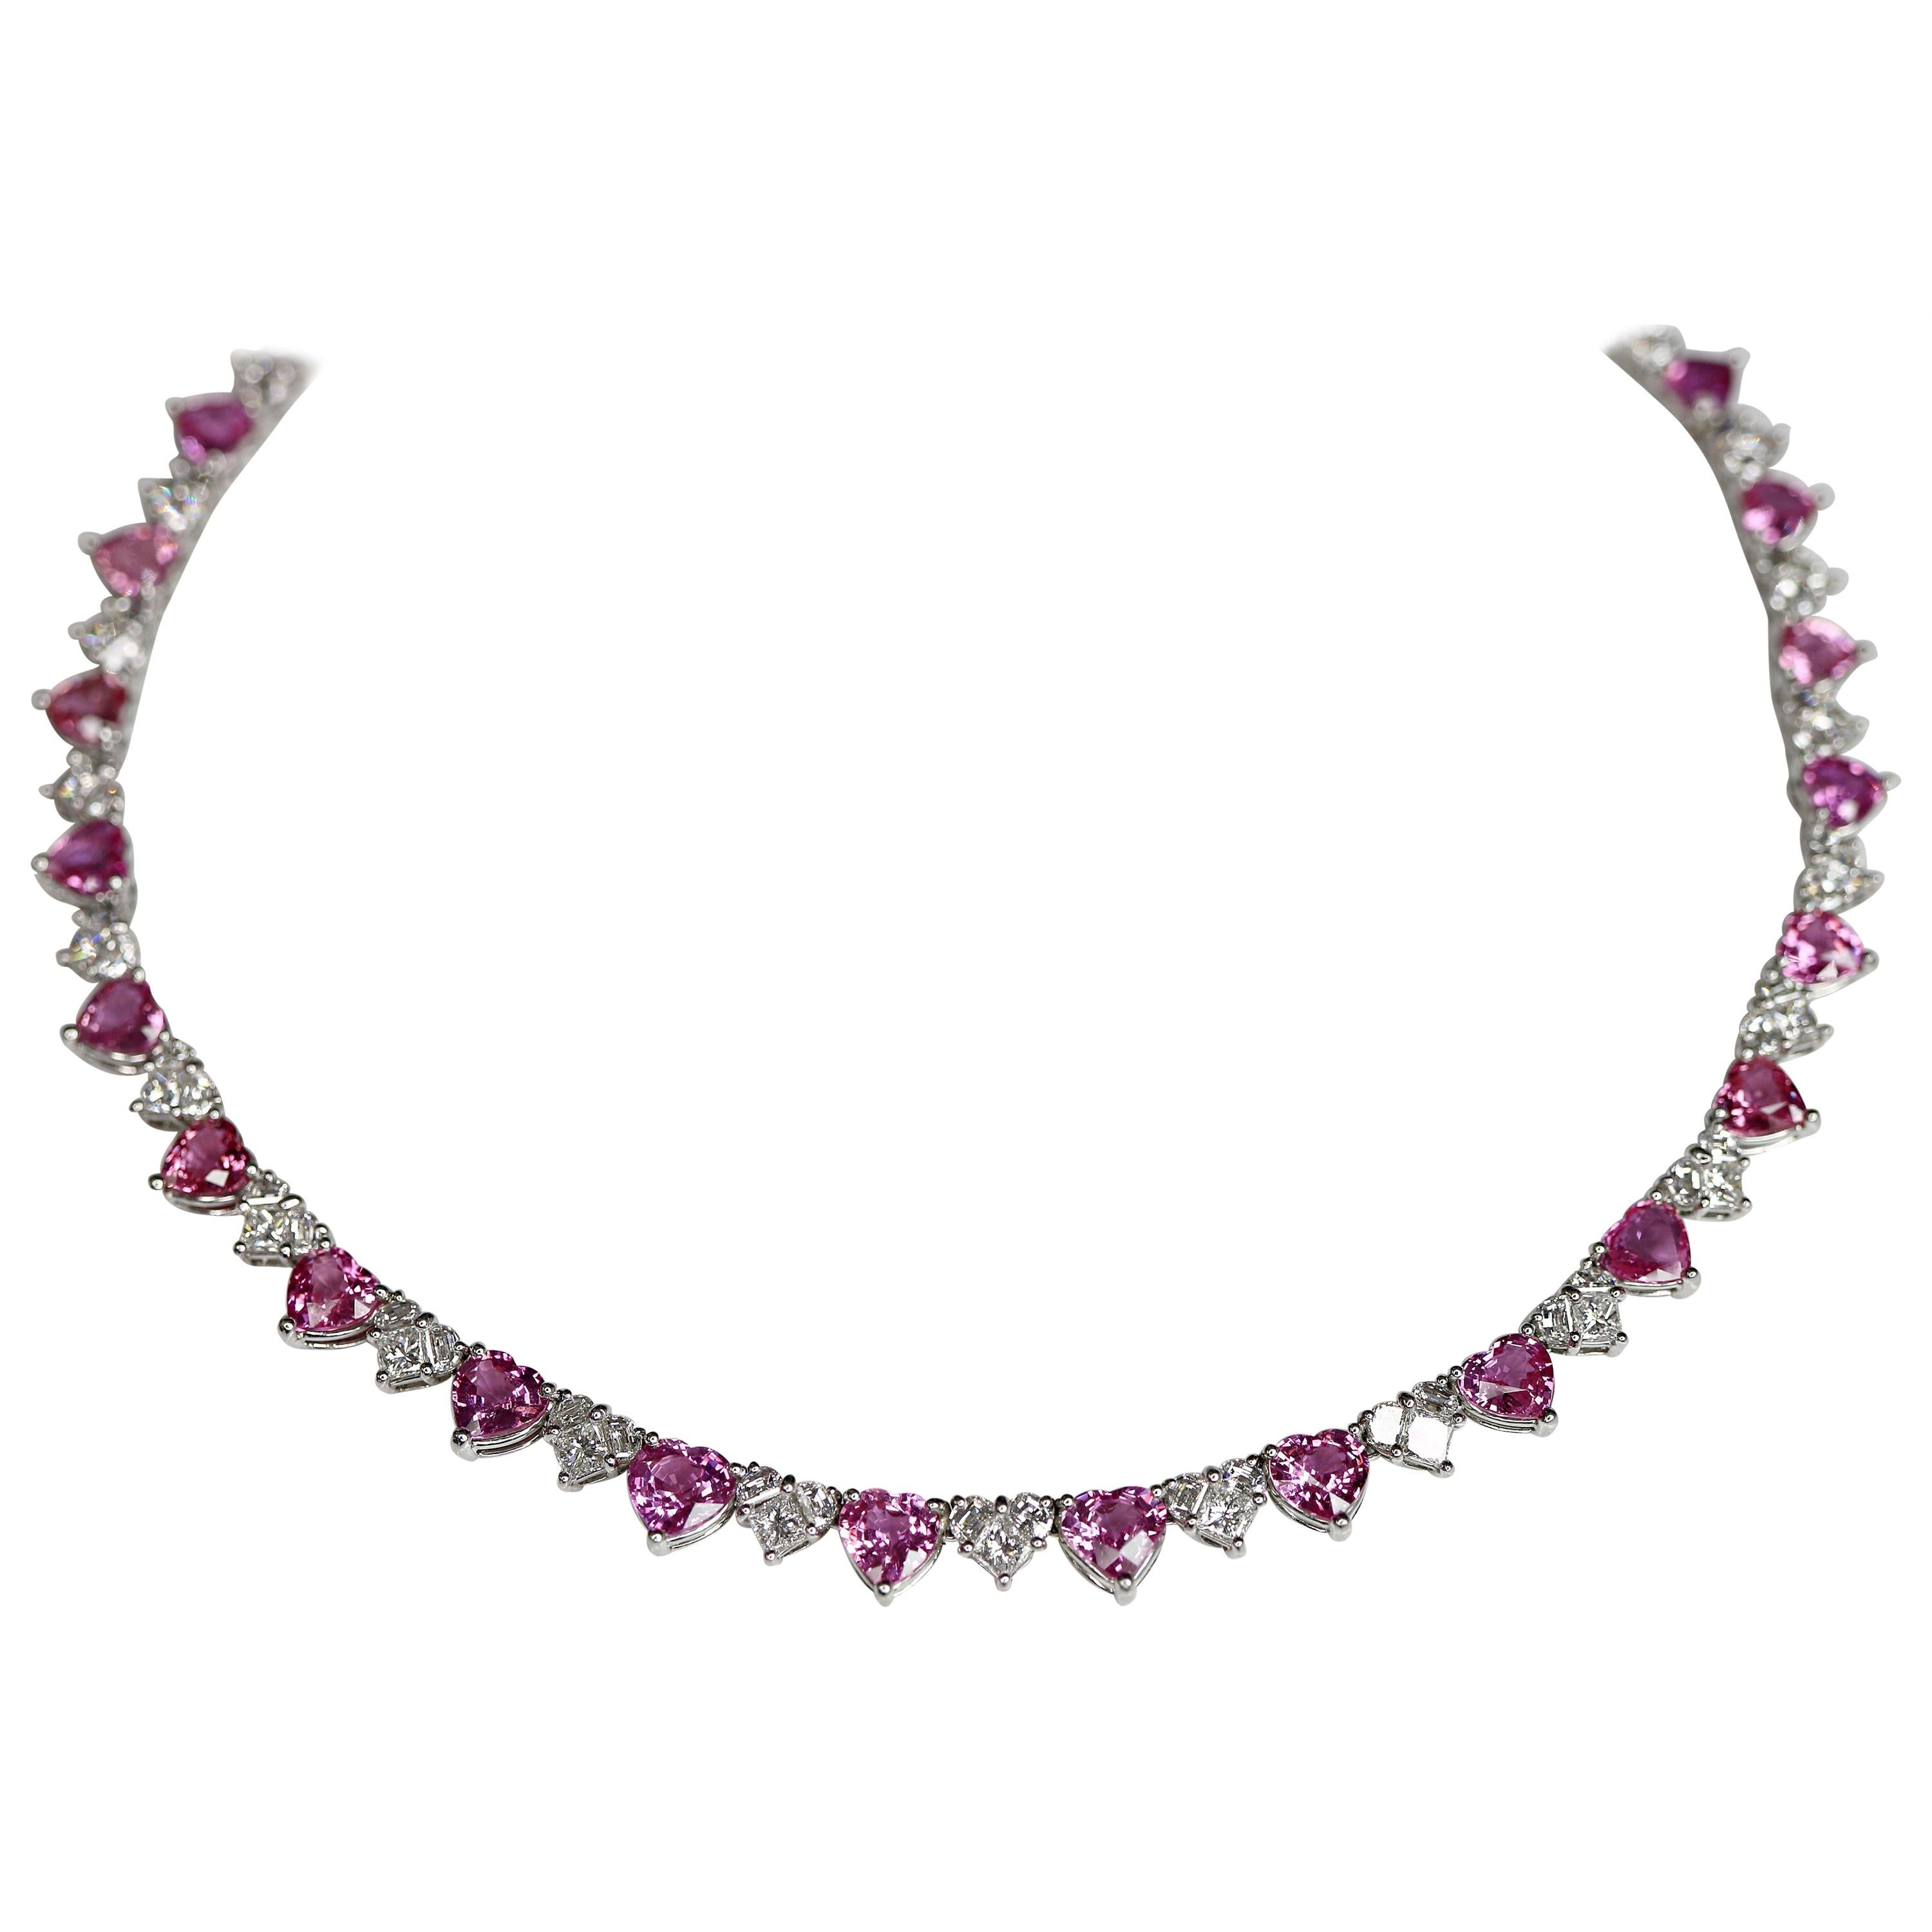 One of a Kind 29.27 Carat Pink Sapphire and Diamonds Necklace For Sale